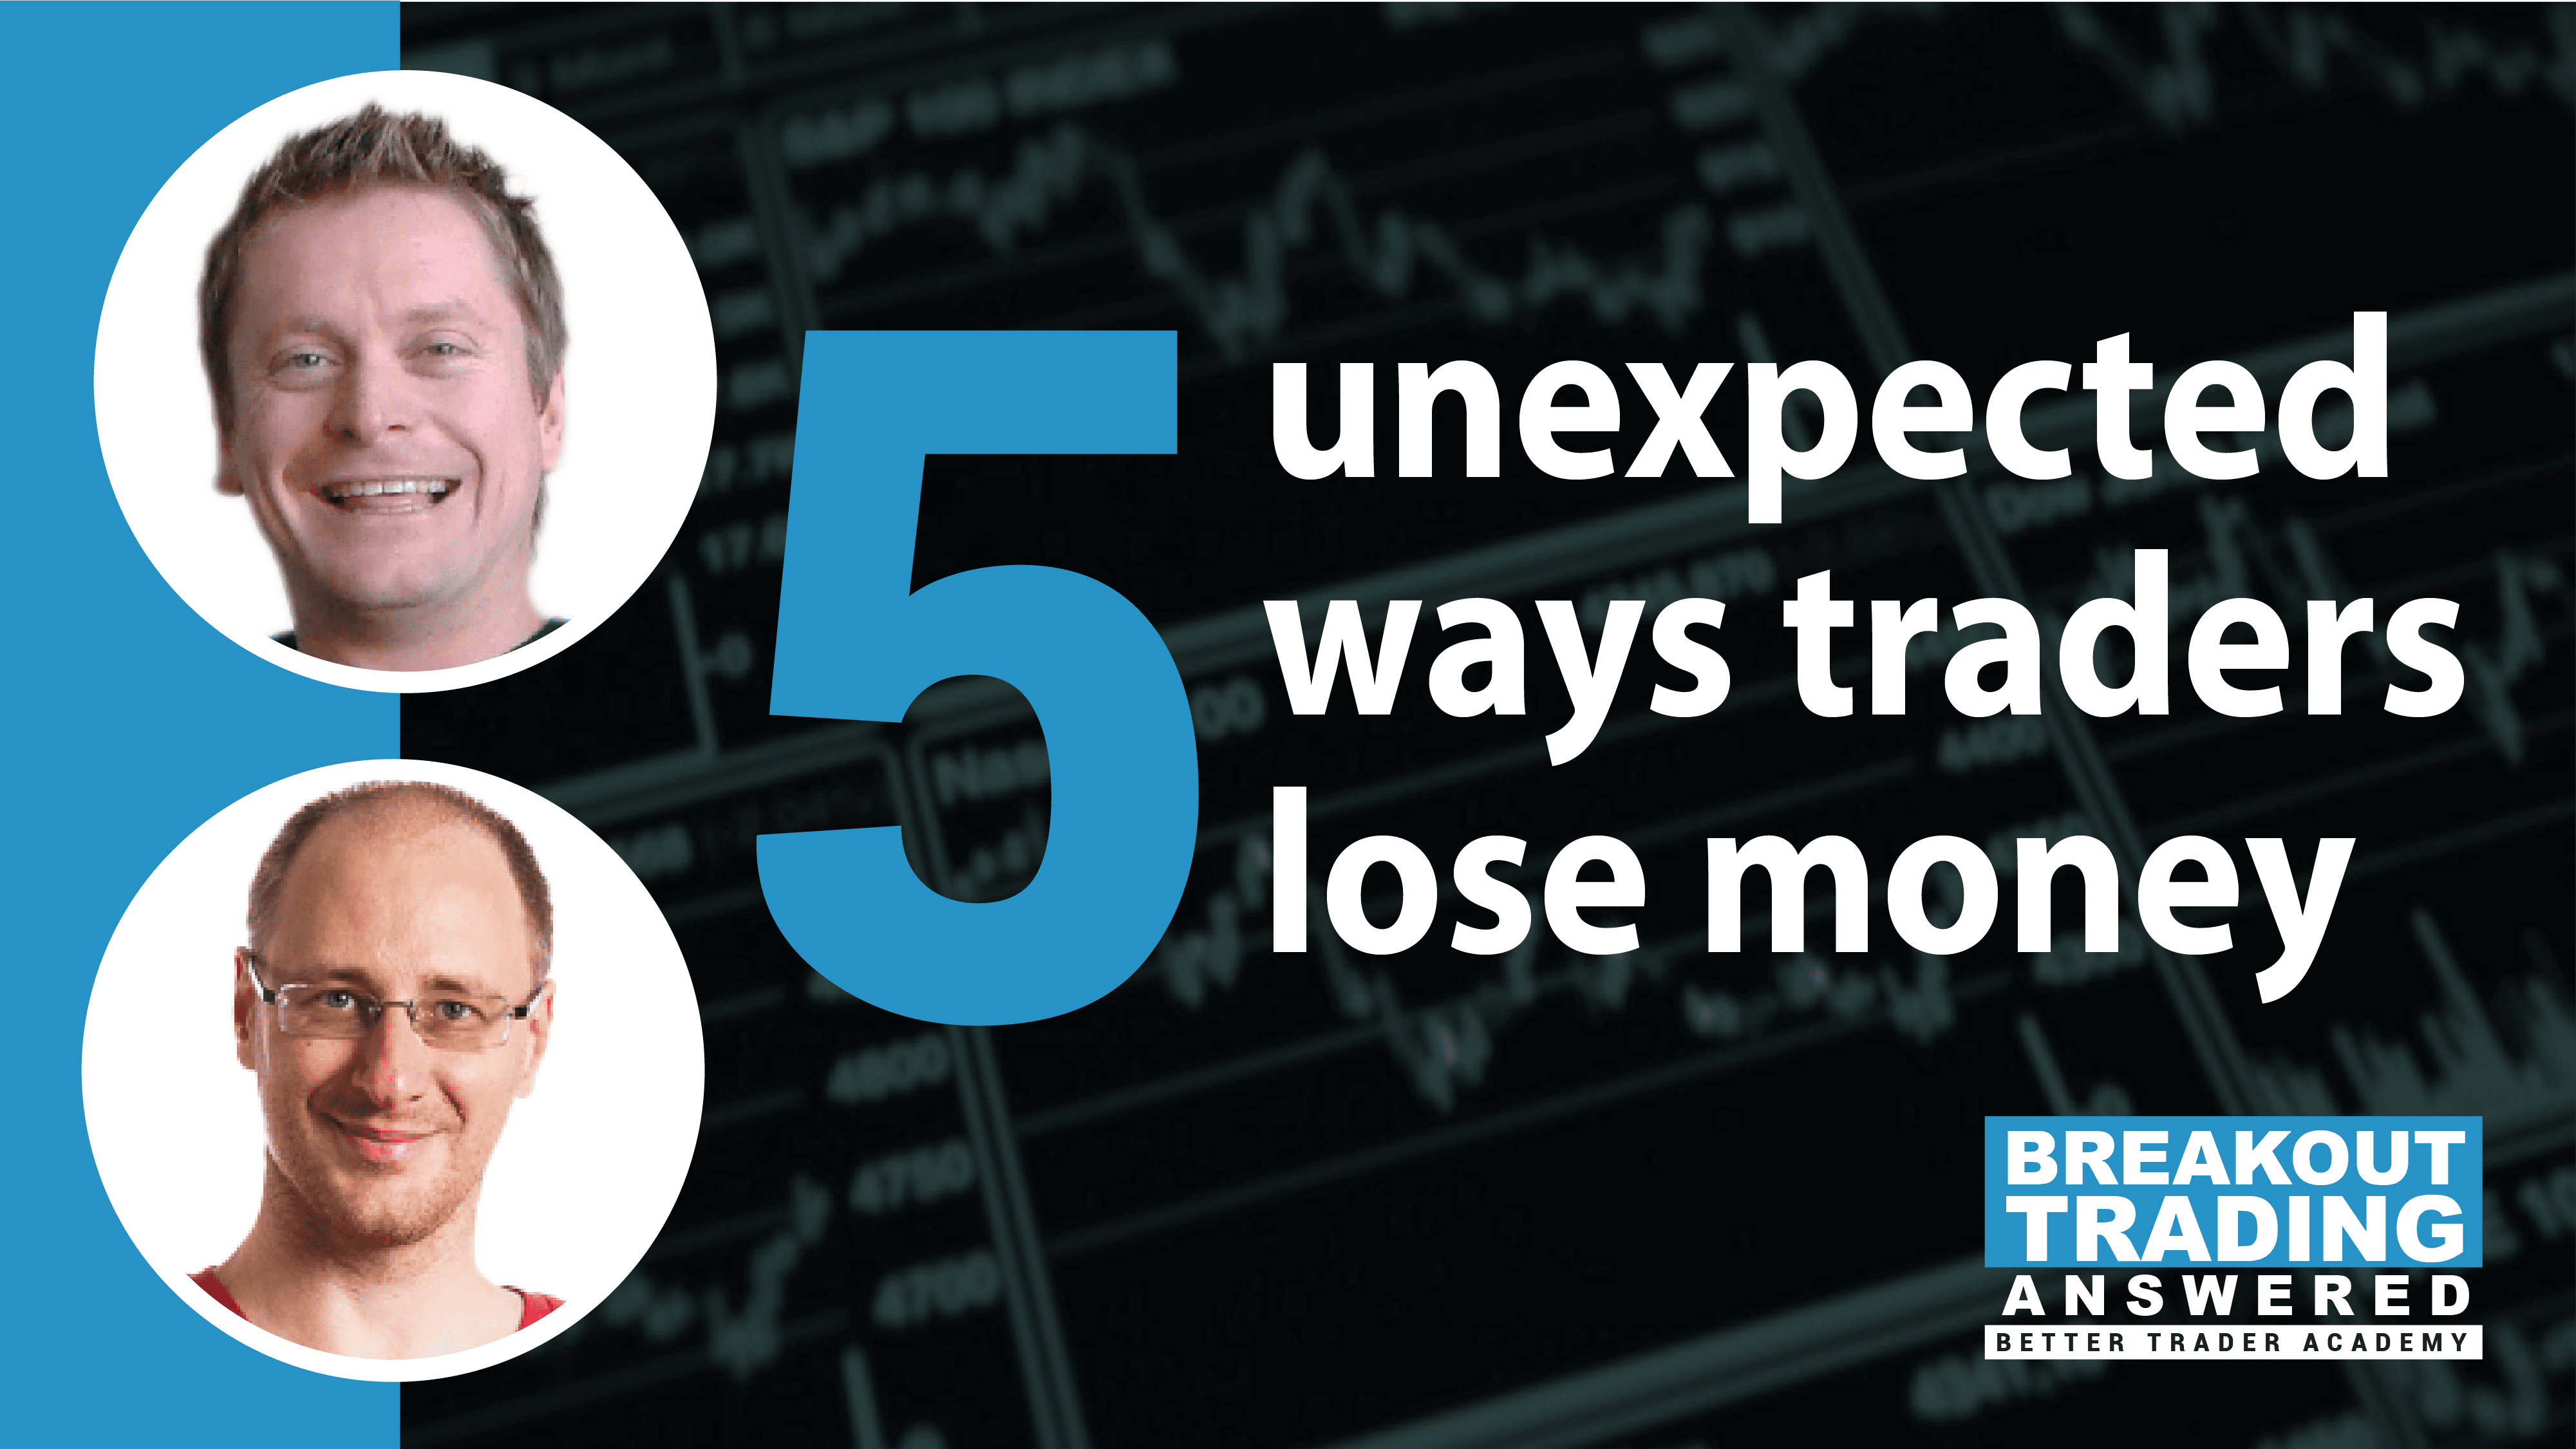 5 unexpected ways traders lose money